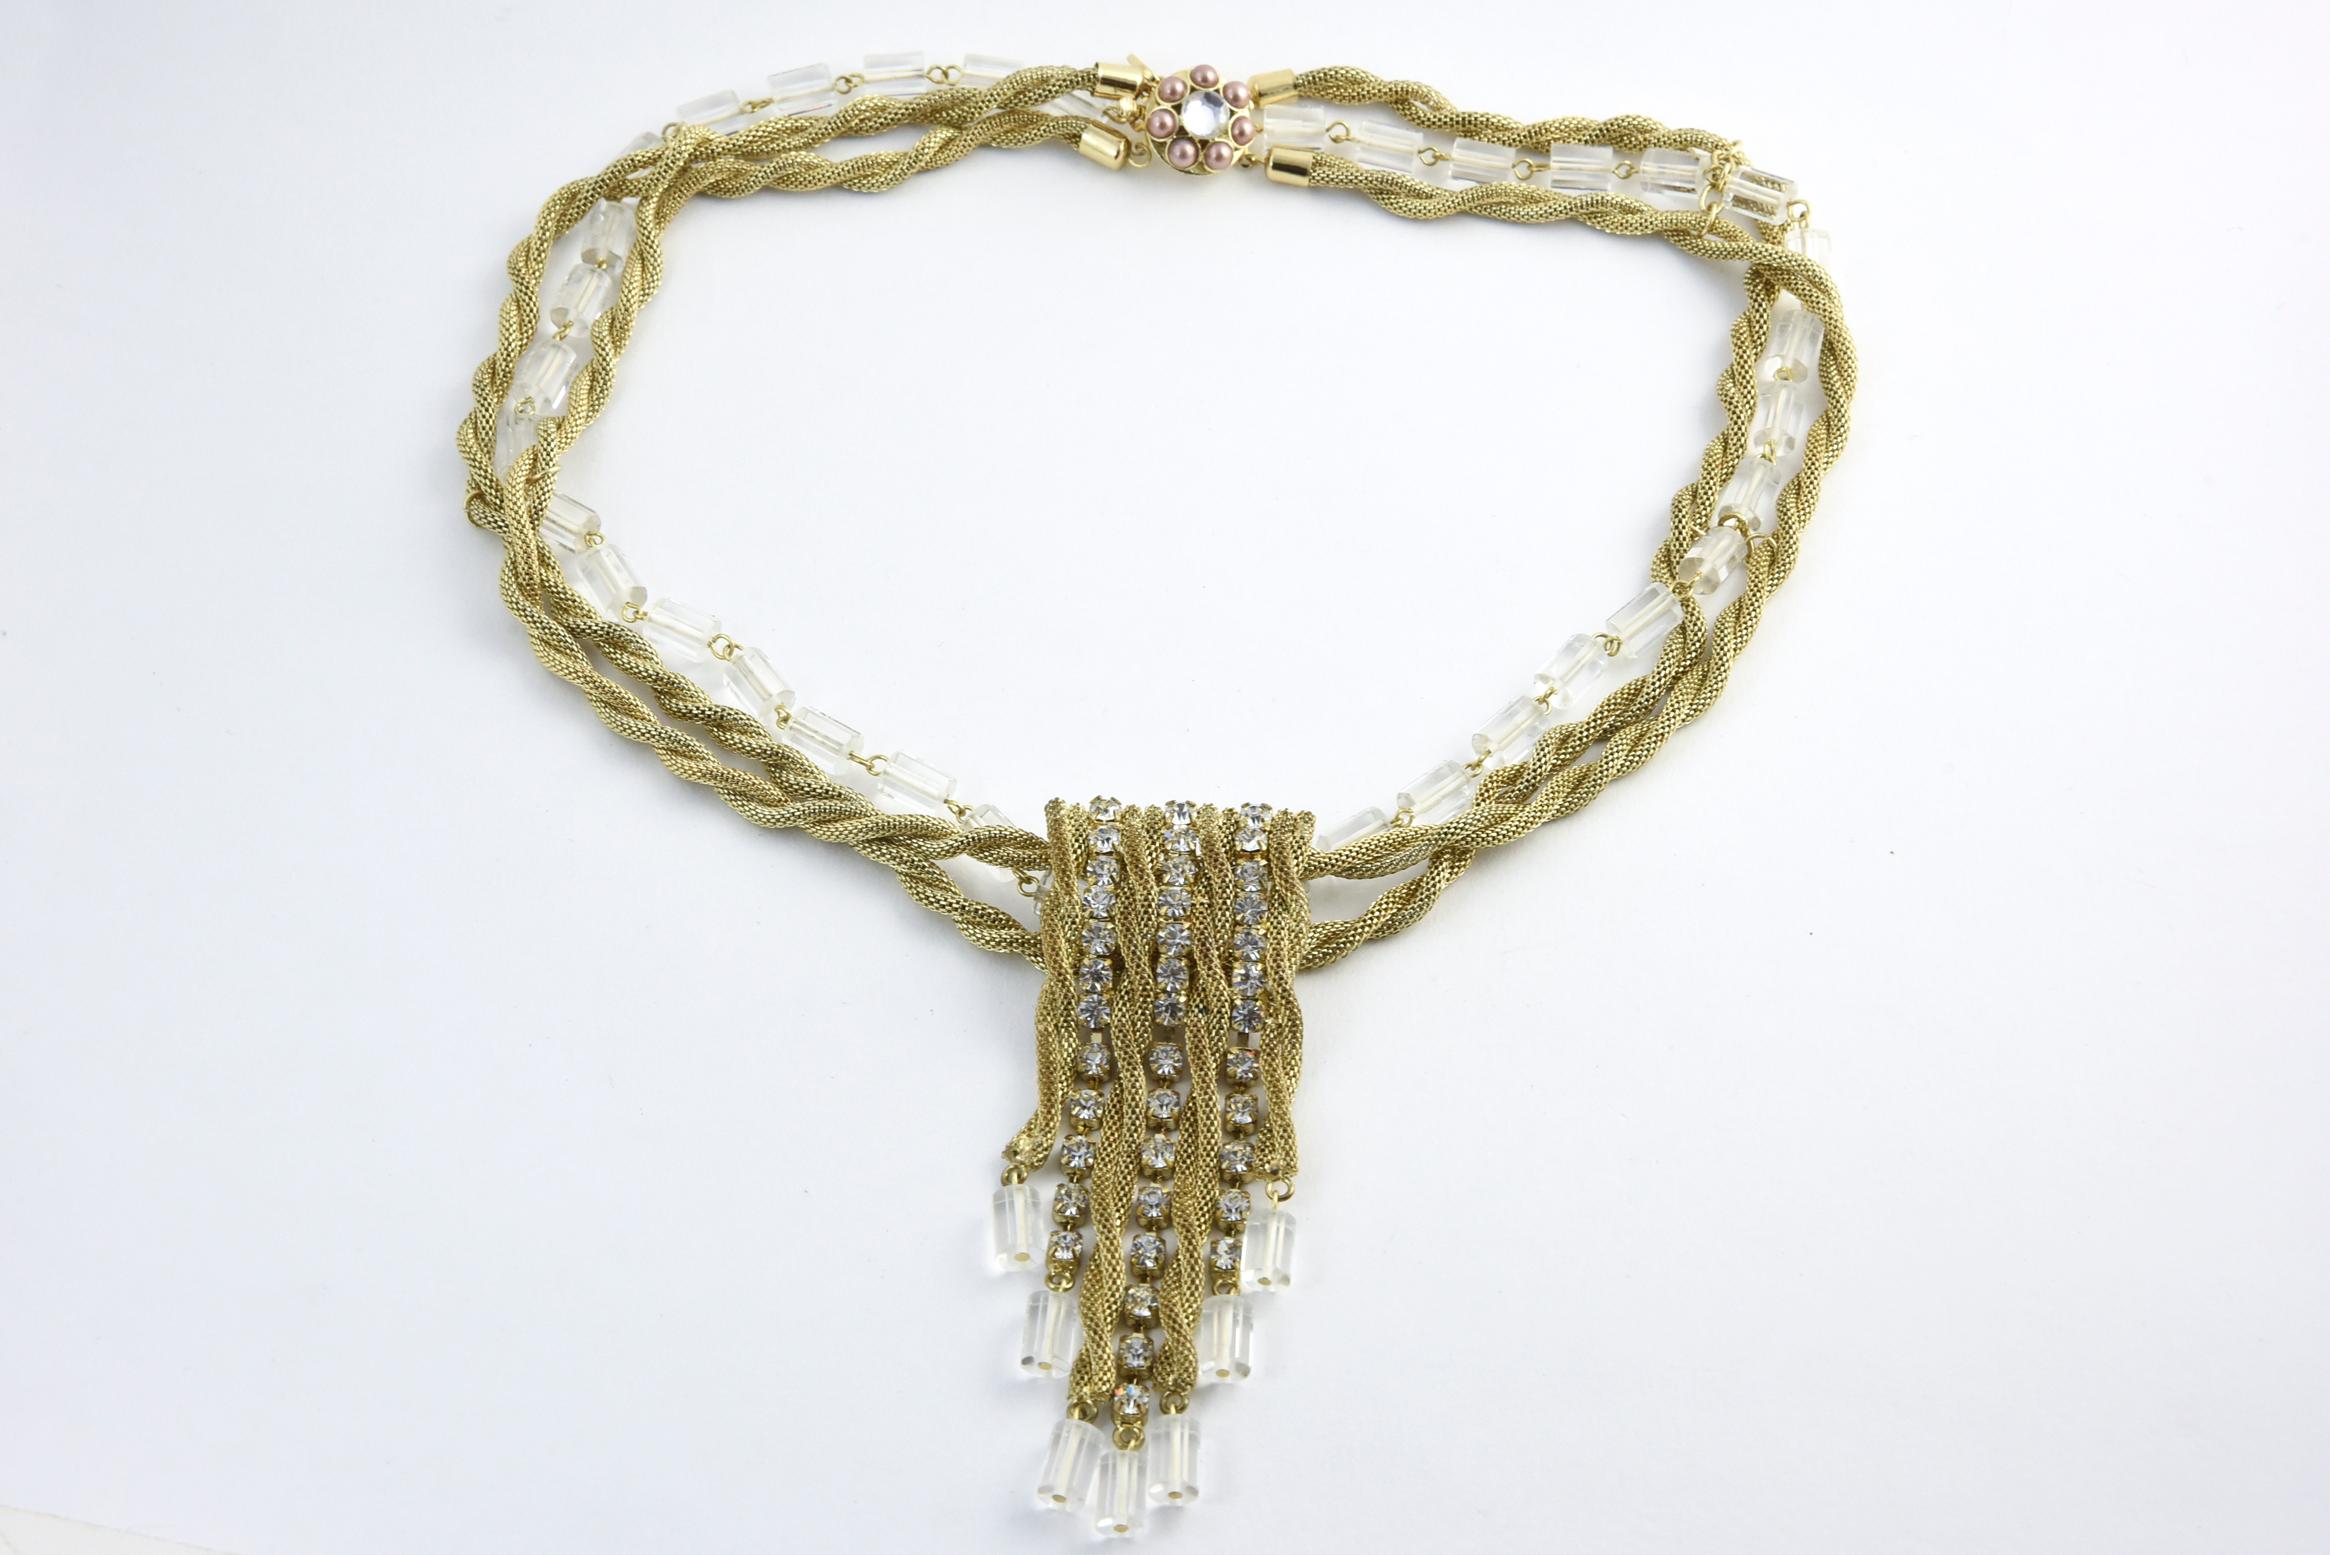 Scassi goldtone rope necklace surrounding Lucite cylinders and square rhinestones. The clasp has a rhinestone center surrounded by seven faux-pearls. Center rhinestone piece, 4.25